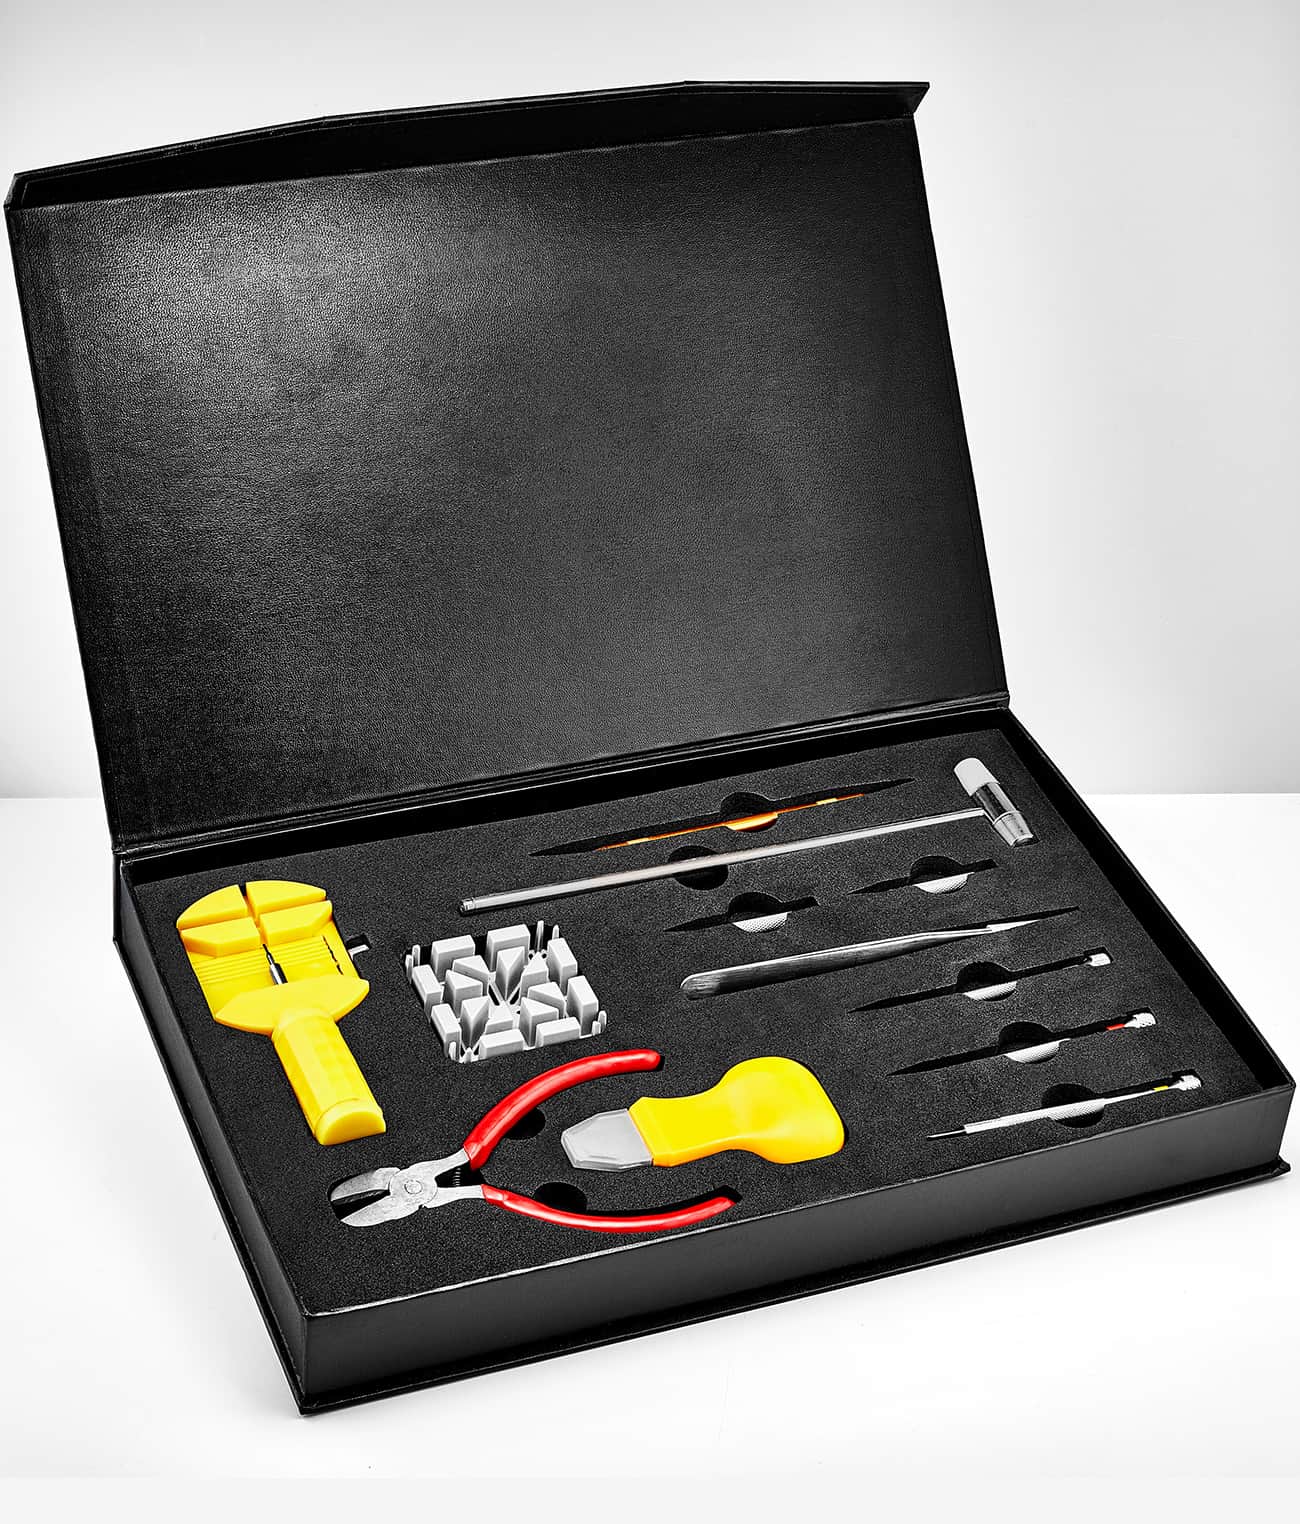 Depthmaster 883.01, Sion 1001.02, Signature Pen, and Watch Tool Kit